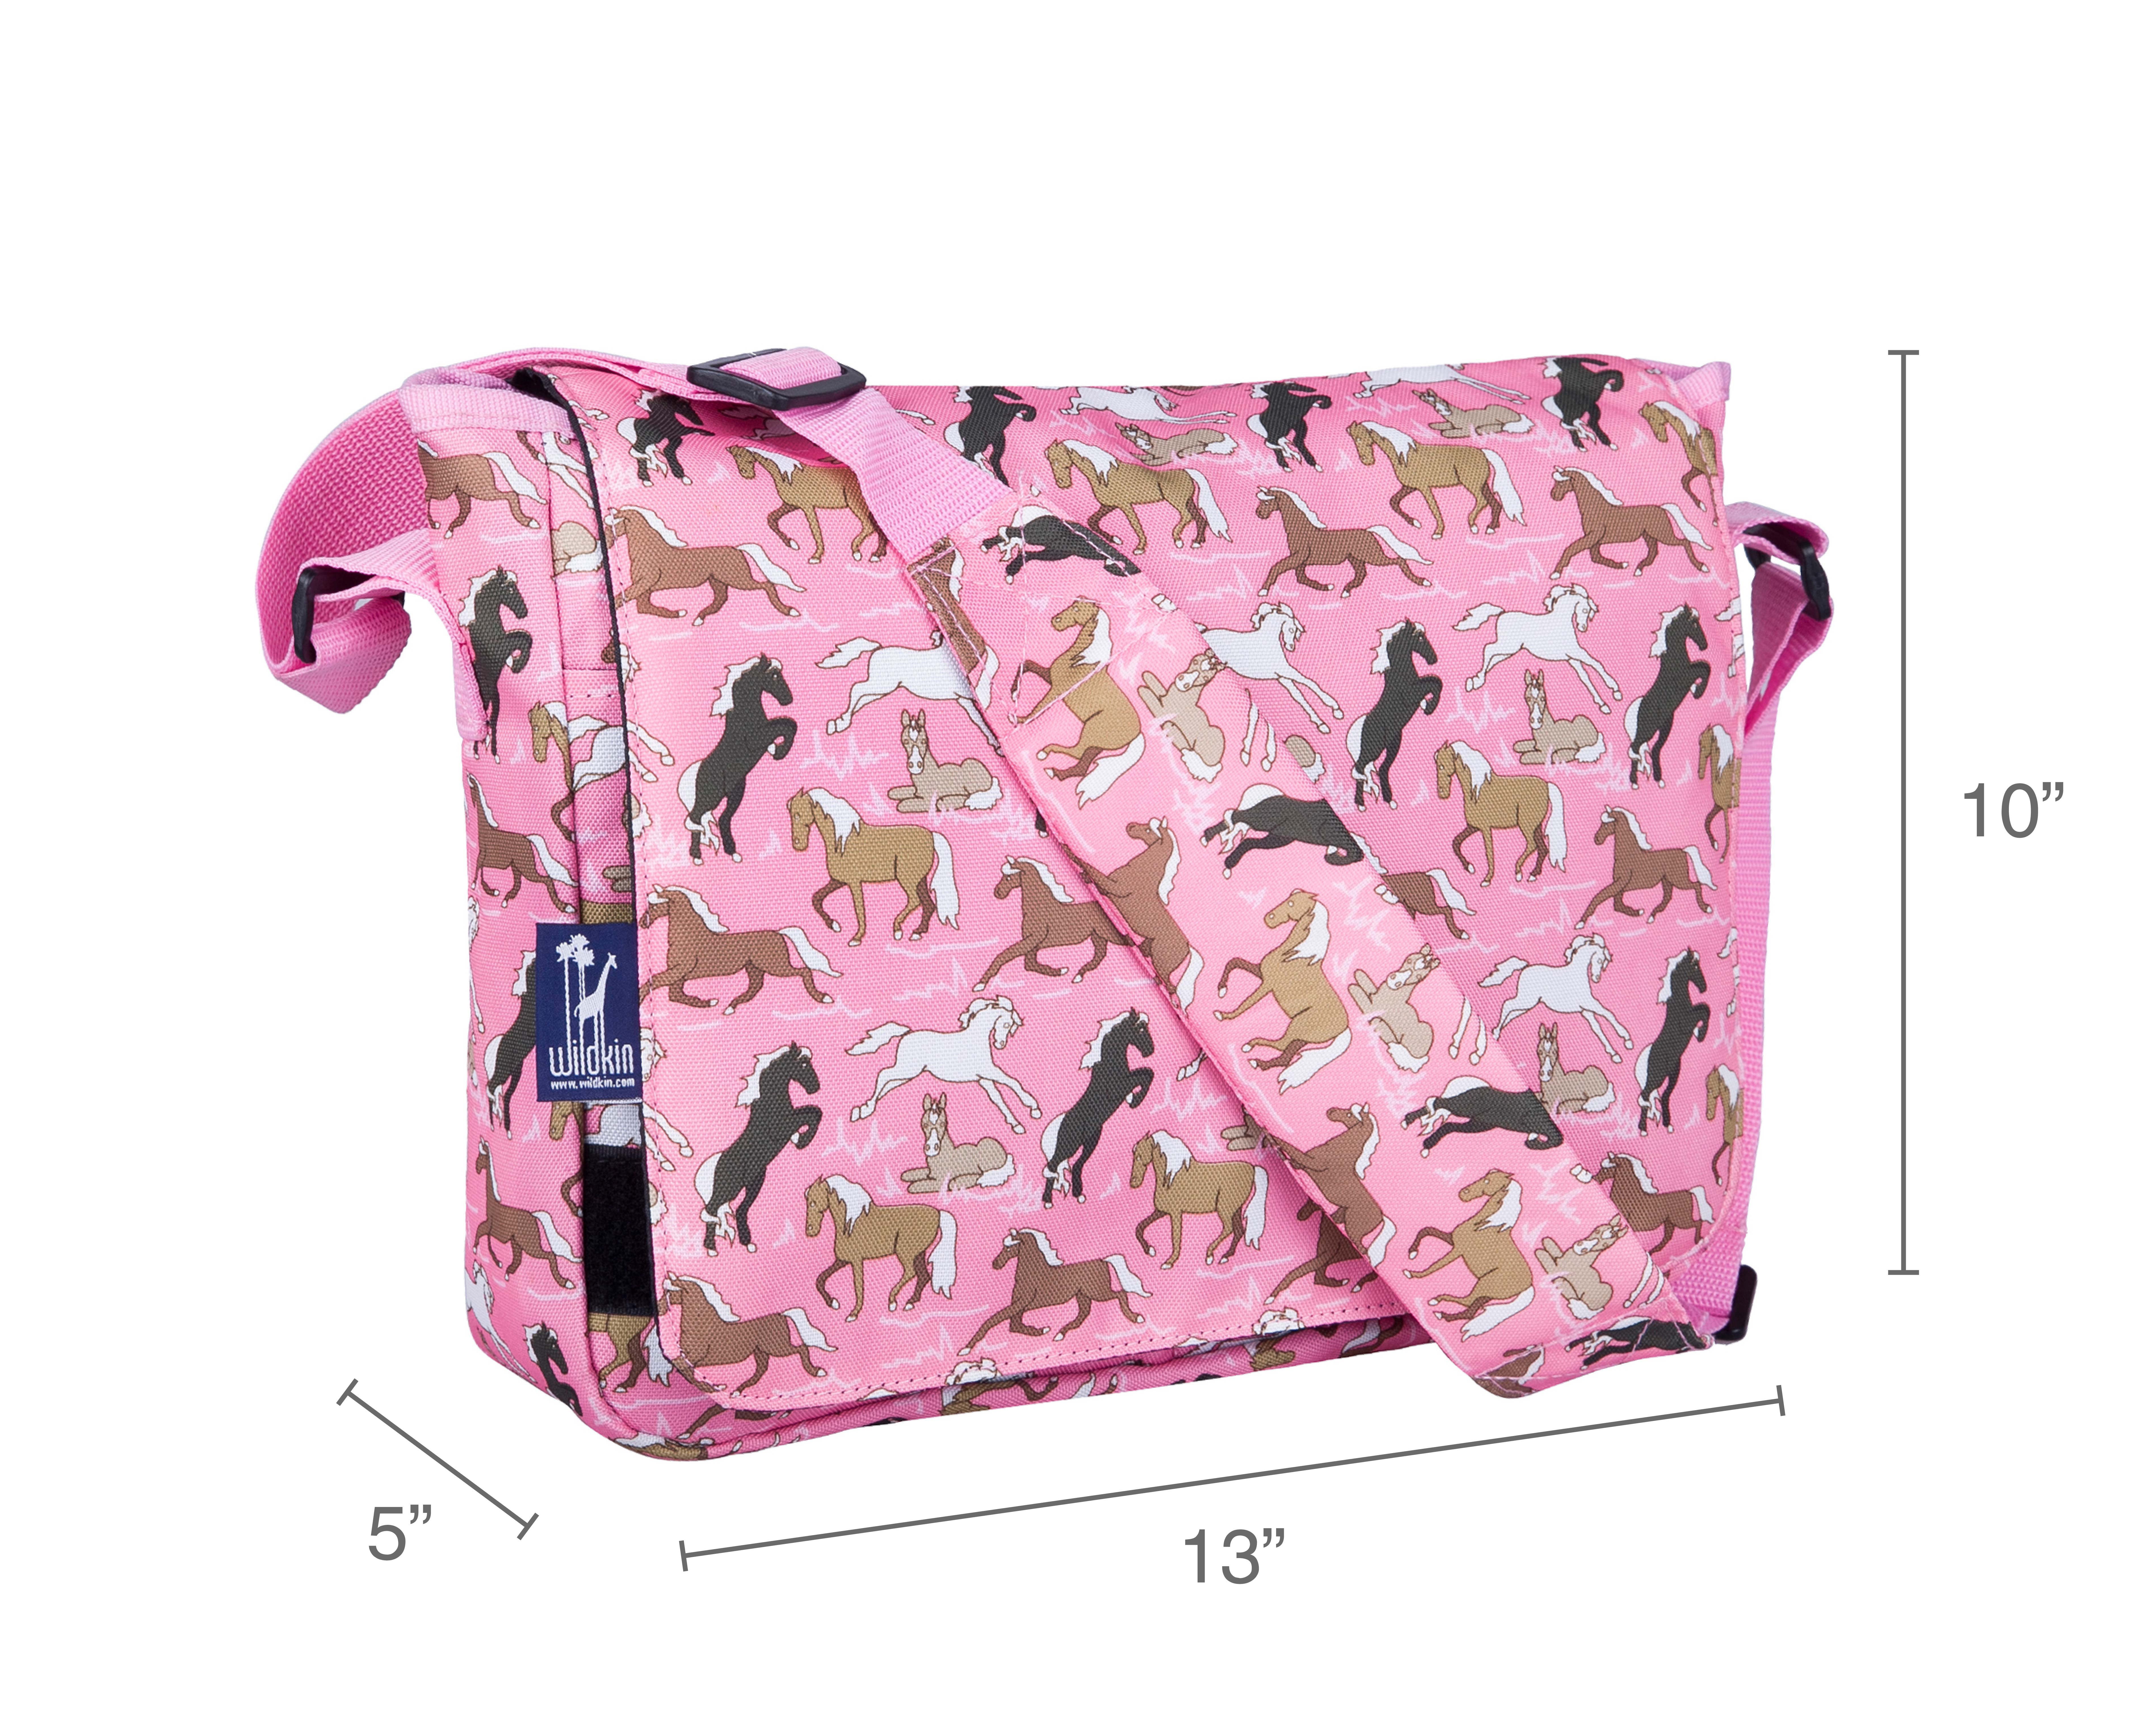 Wildkin Kids Messenger Bag, Perfect for School or Travel, 13 Inch (Horses in Pink) - image 5 of 7